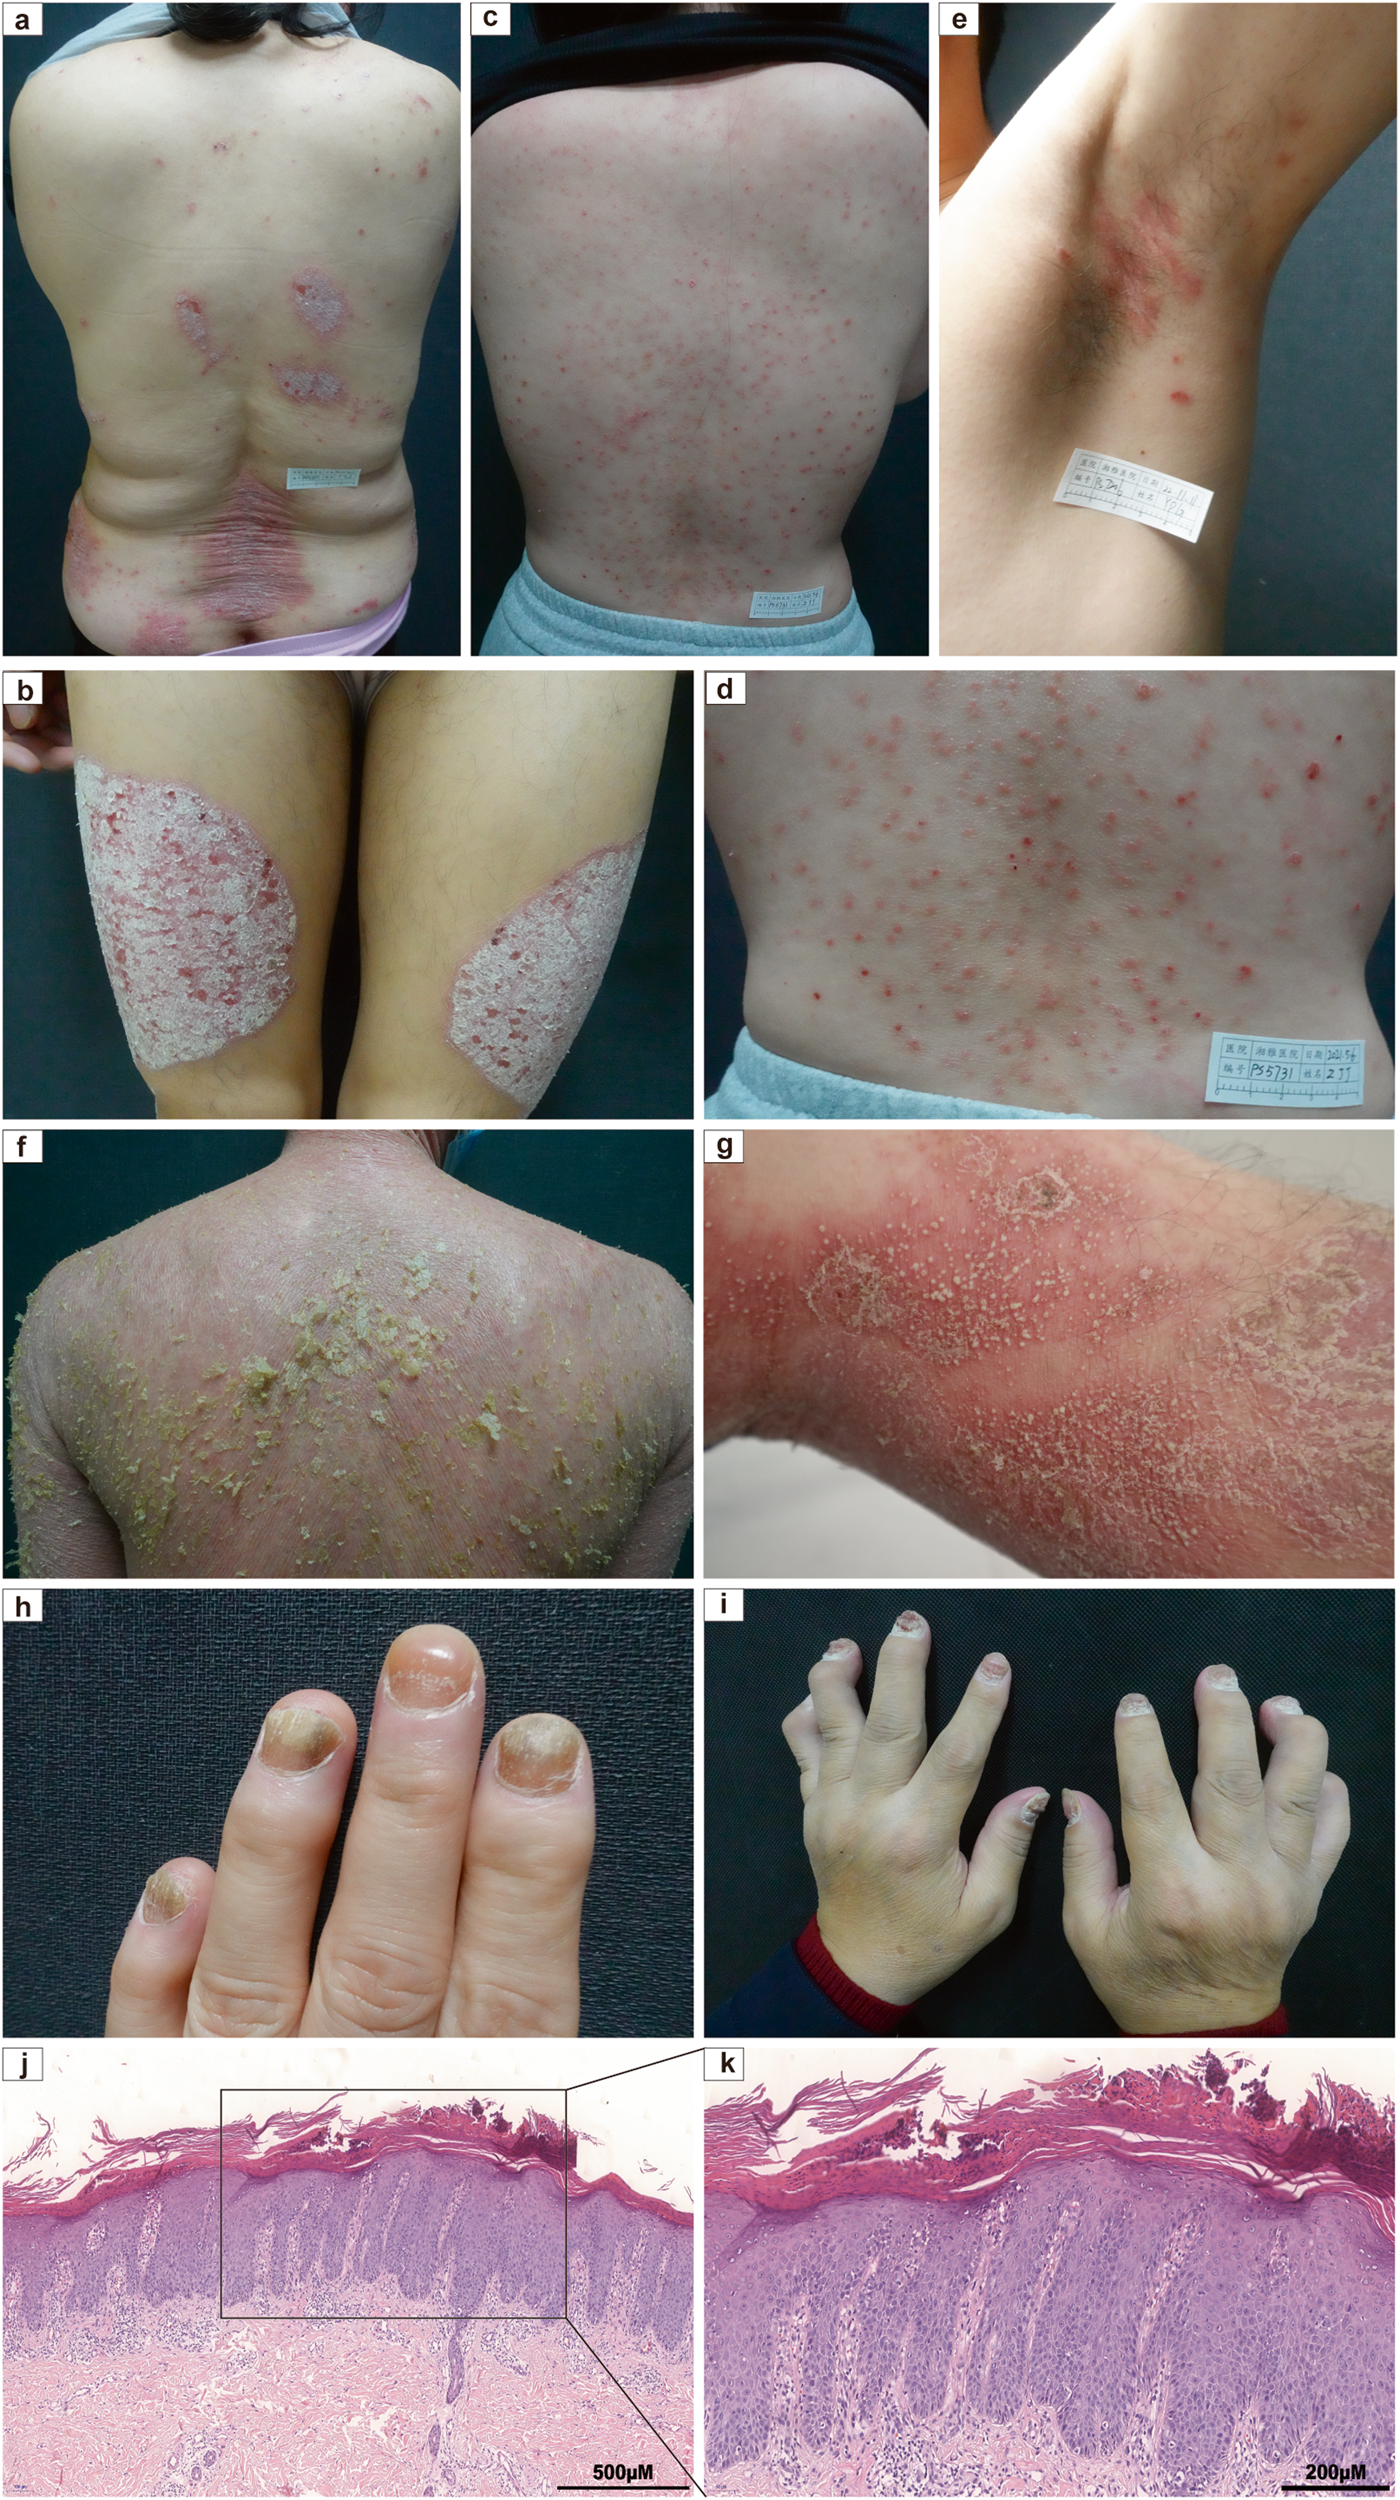 Holistic Approach for Psoriasis Treatment - Functional Medicine